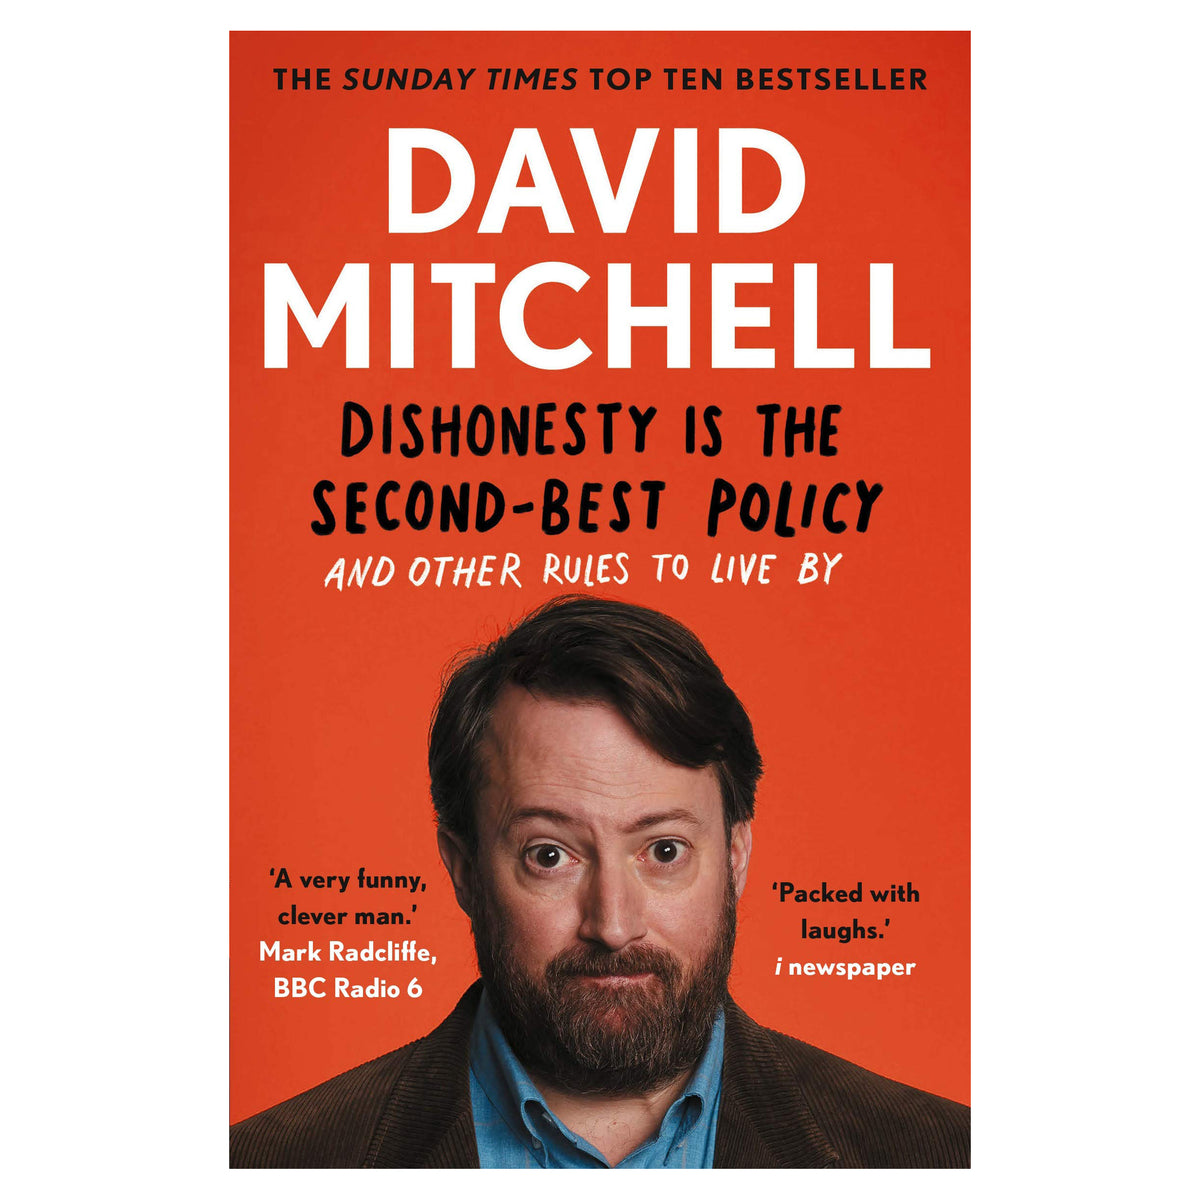 David Mitchell Dishonesty is the Second-Best Policy